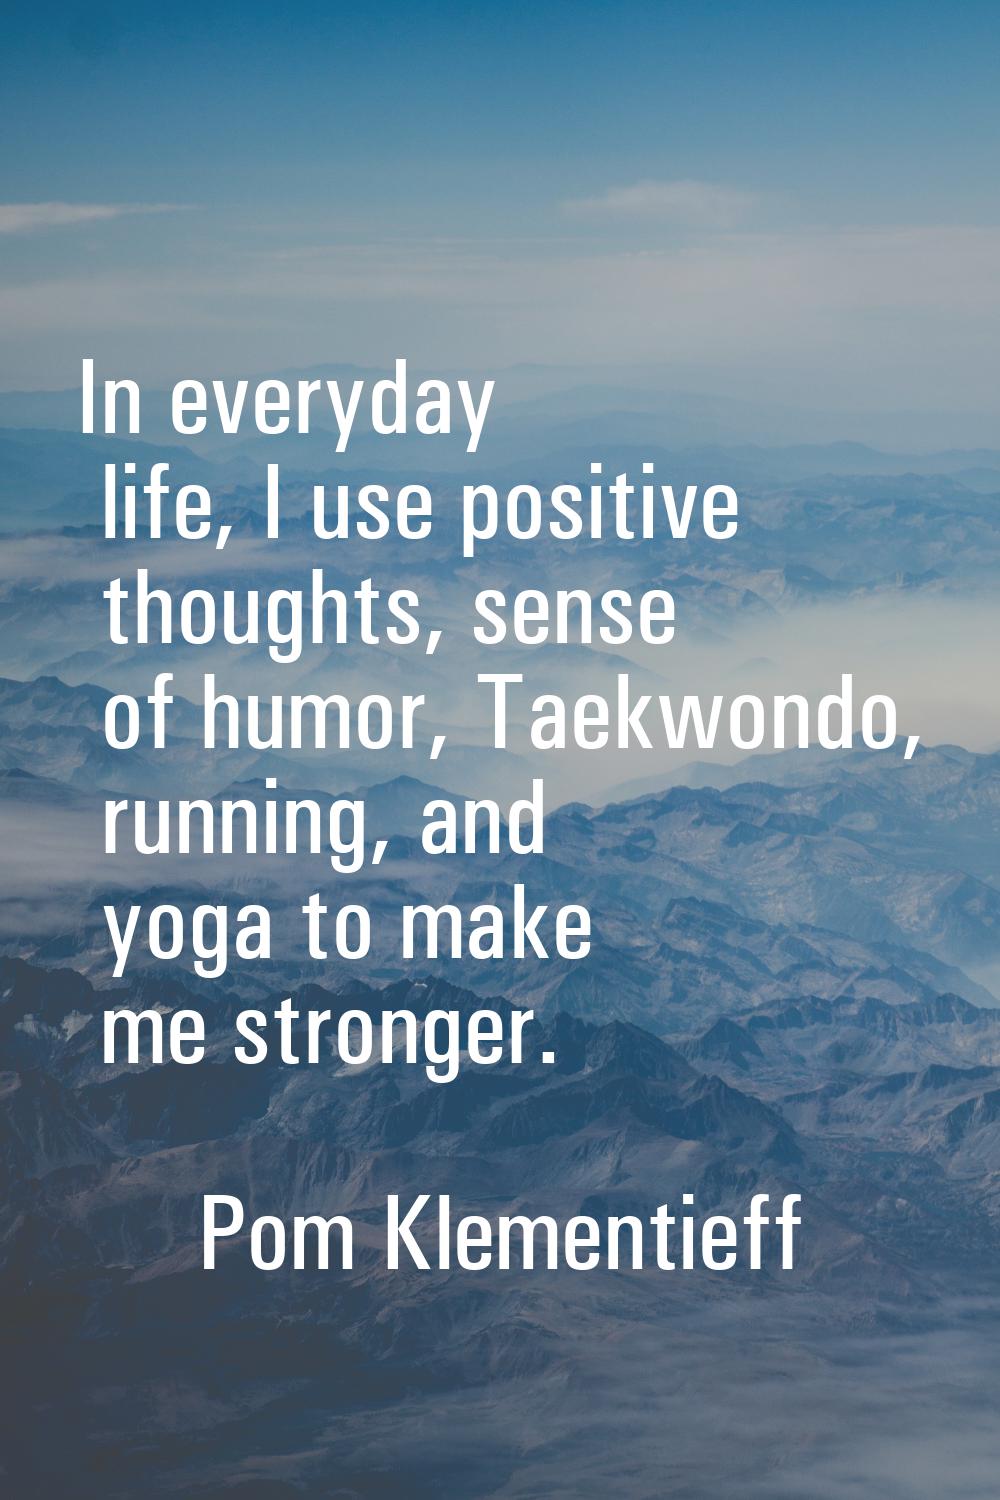 In everyday life, I use positive thoughts, sense of humor, Taekwondo, running, and yoga to make me 